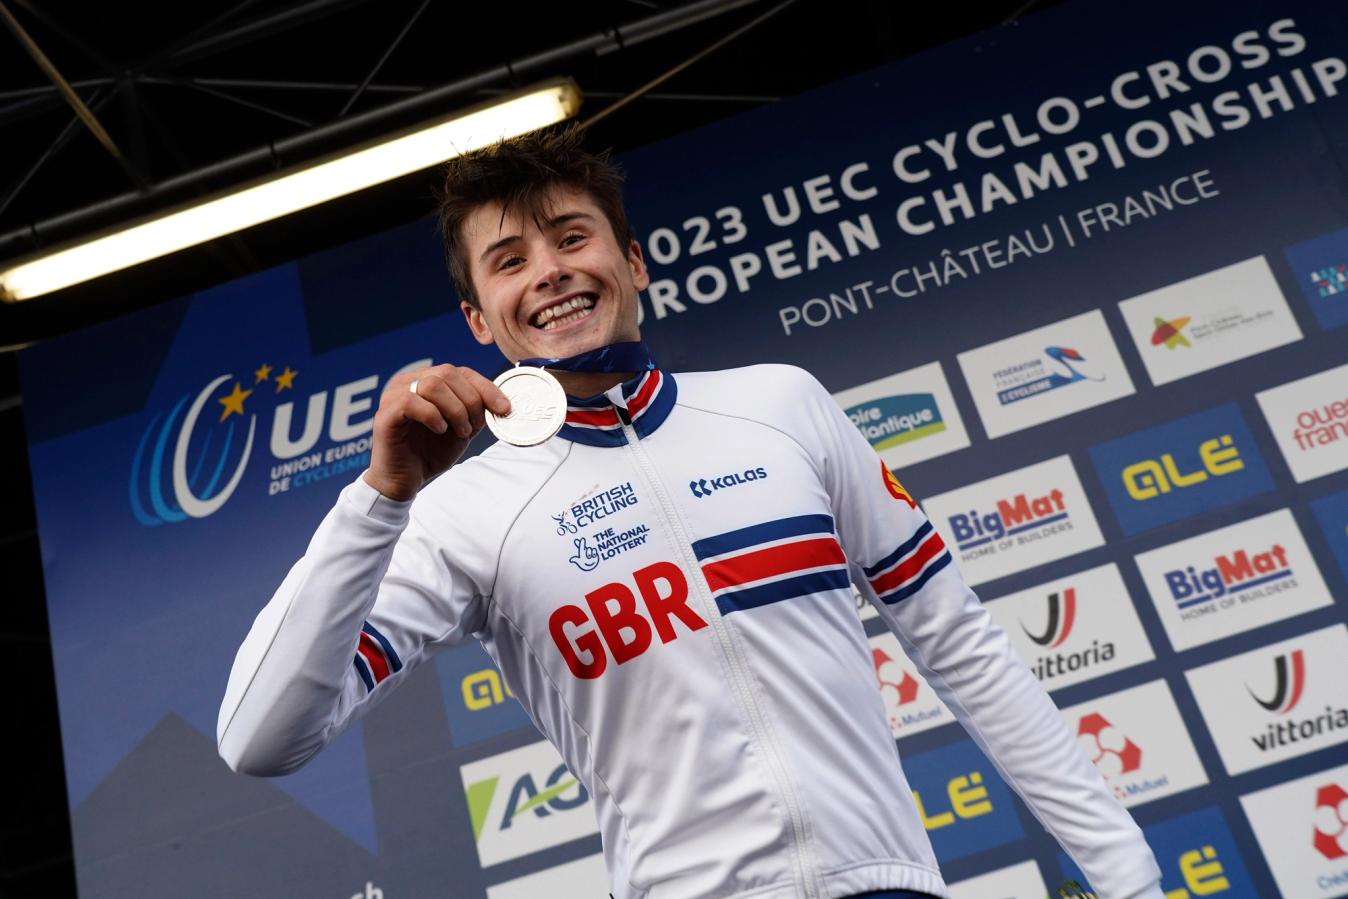 Cameron Mason with his silver medal from the European Championships